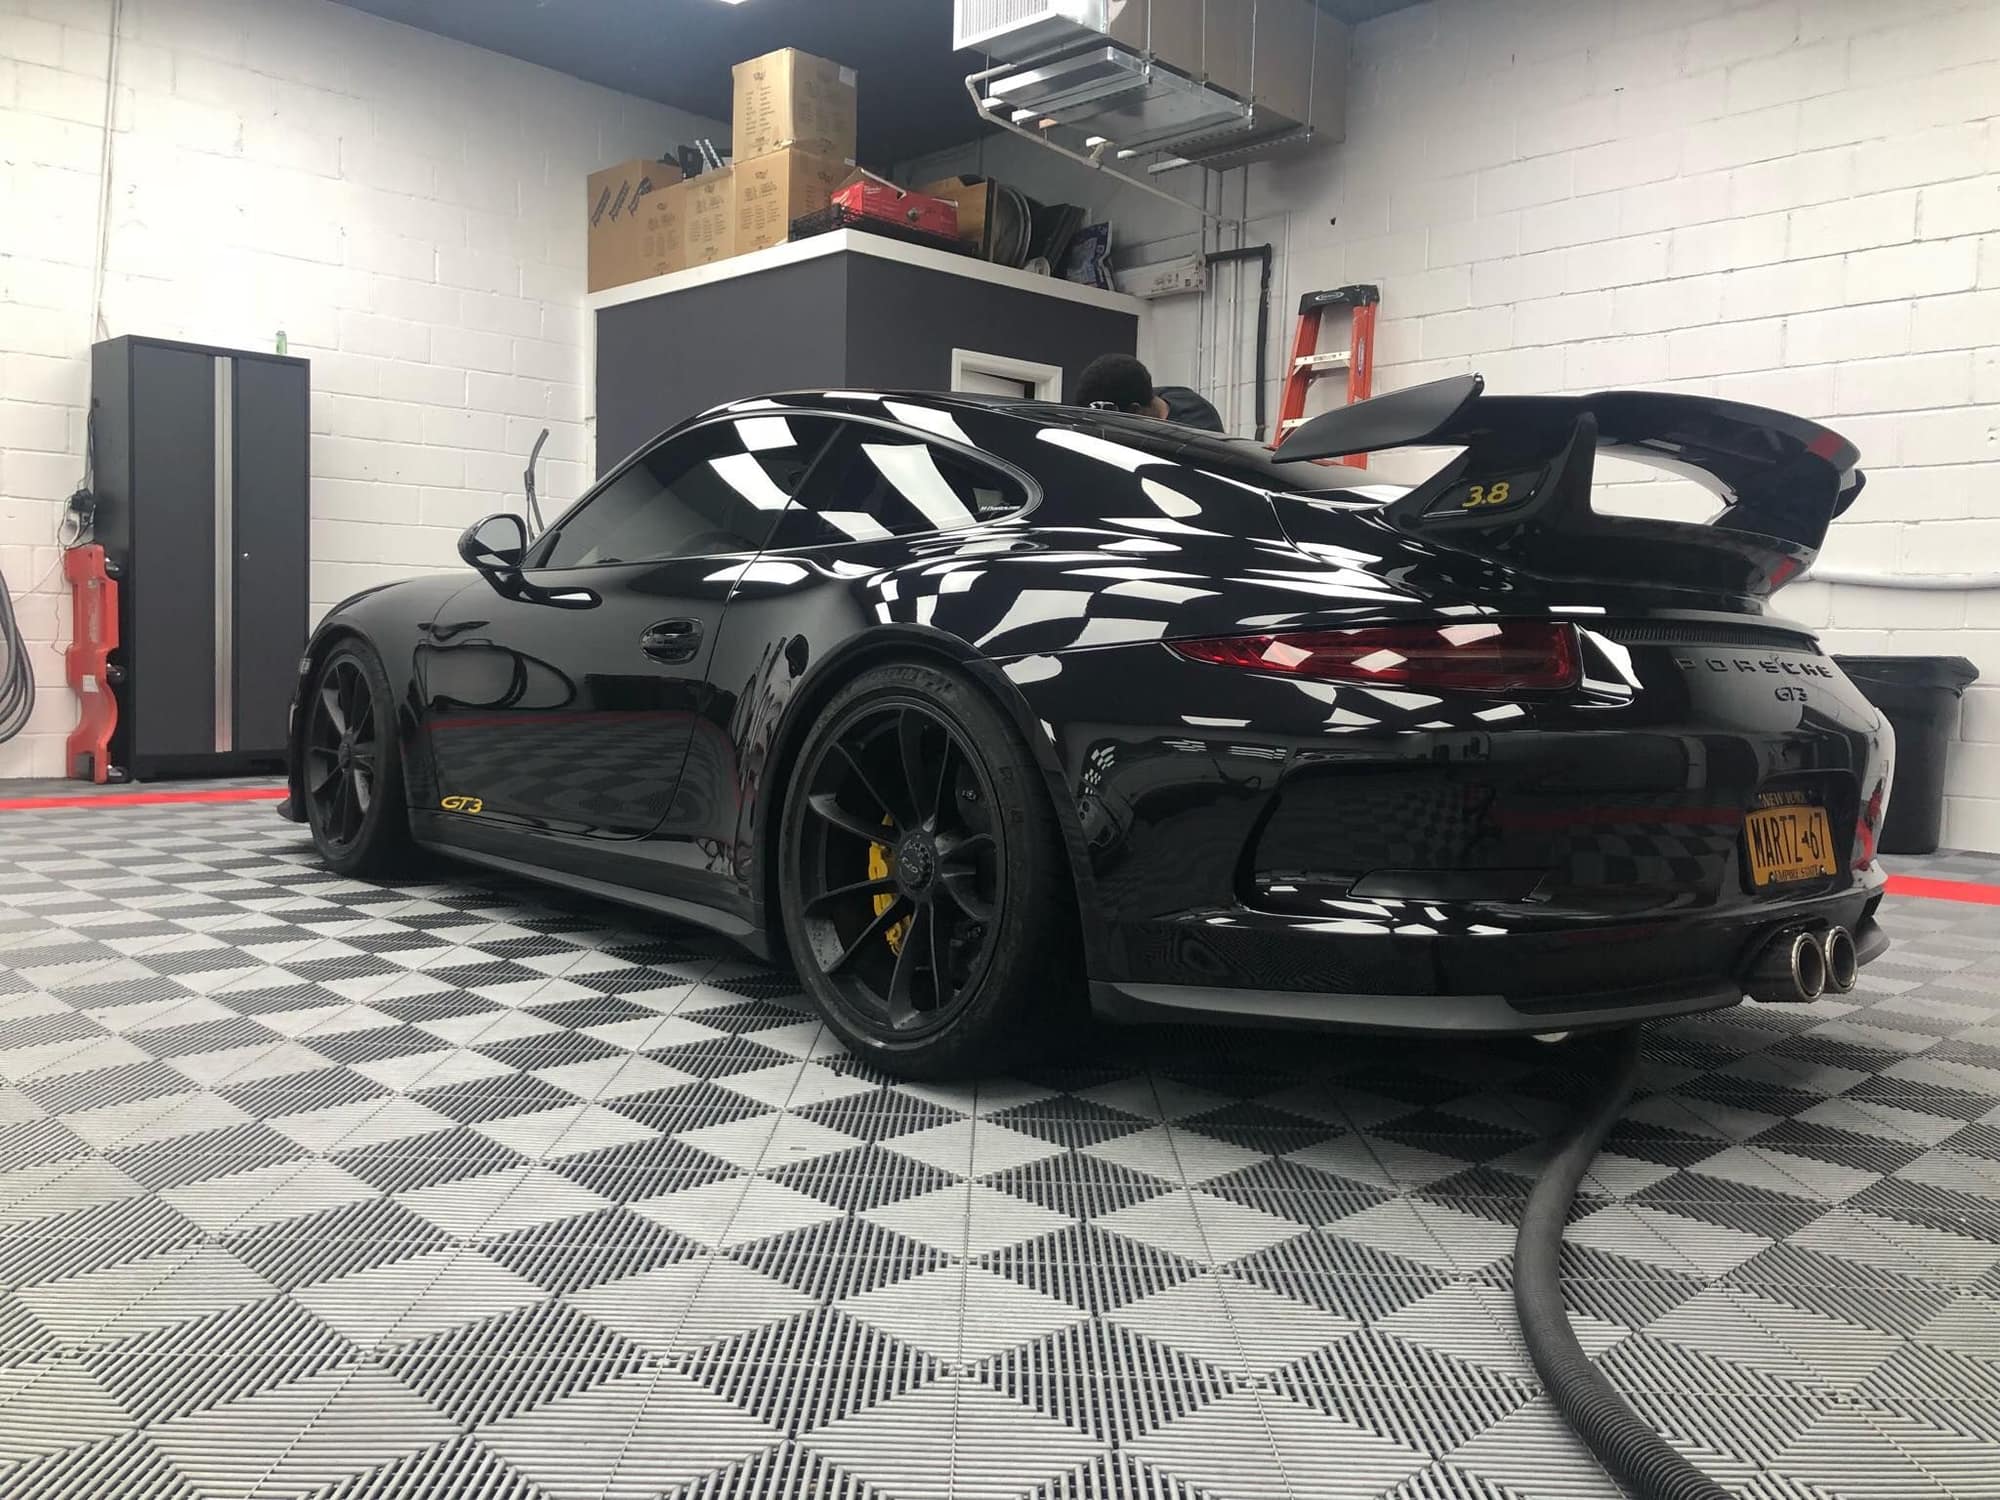 2014 Porsche GT3 - CPO 991.1 Porsche GT3 -black on black- PCCBs & new engine - Used - VIN WP0AC2A96ES183601 - 31,700 Miles - 6 cyl - 2WD - Automatic - Coupe - Black - Weehawken, NJ 07086, United States